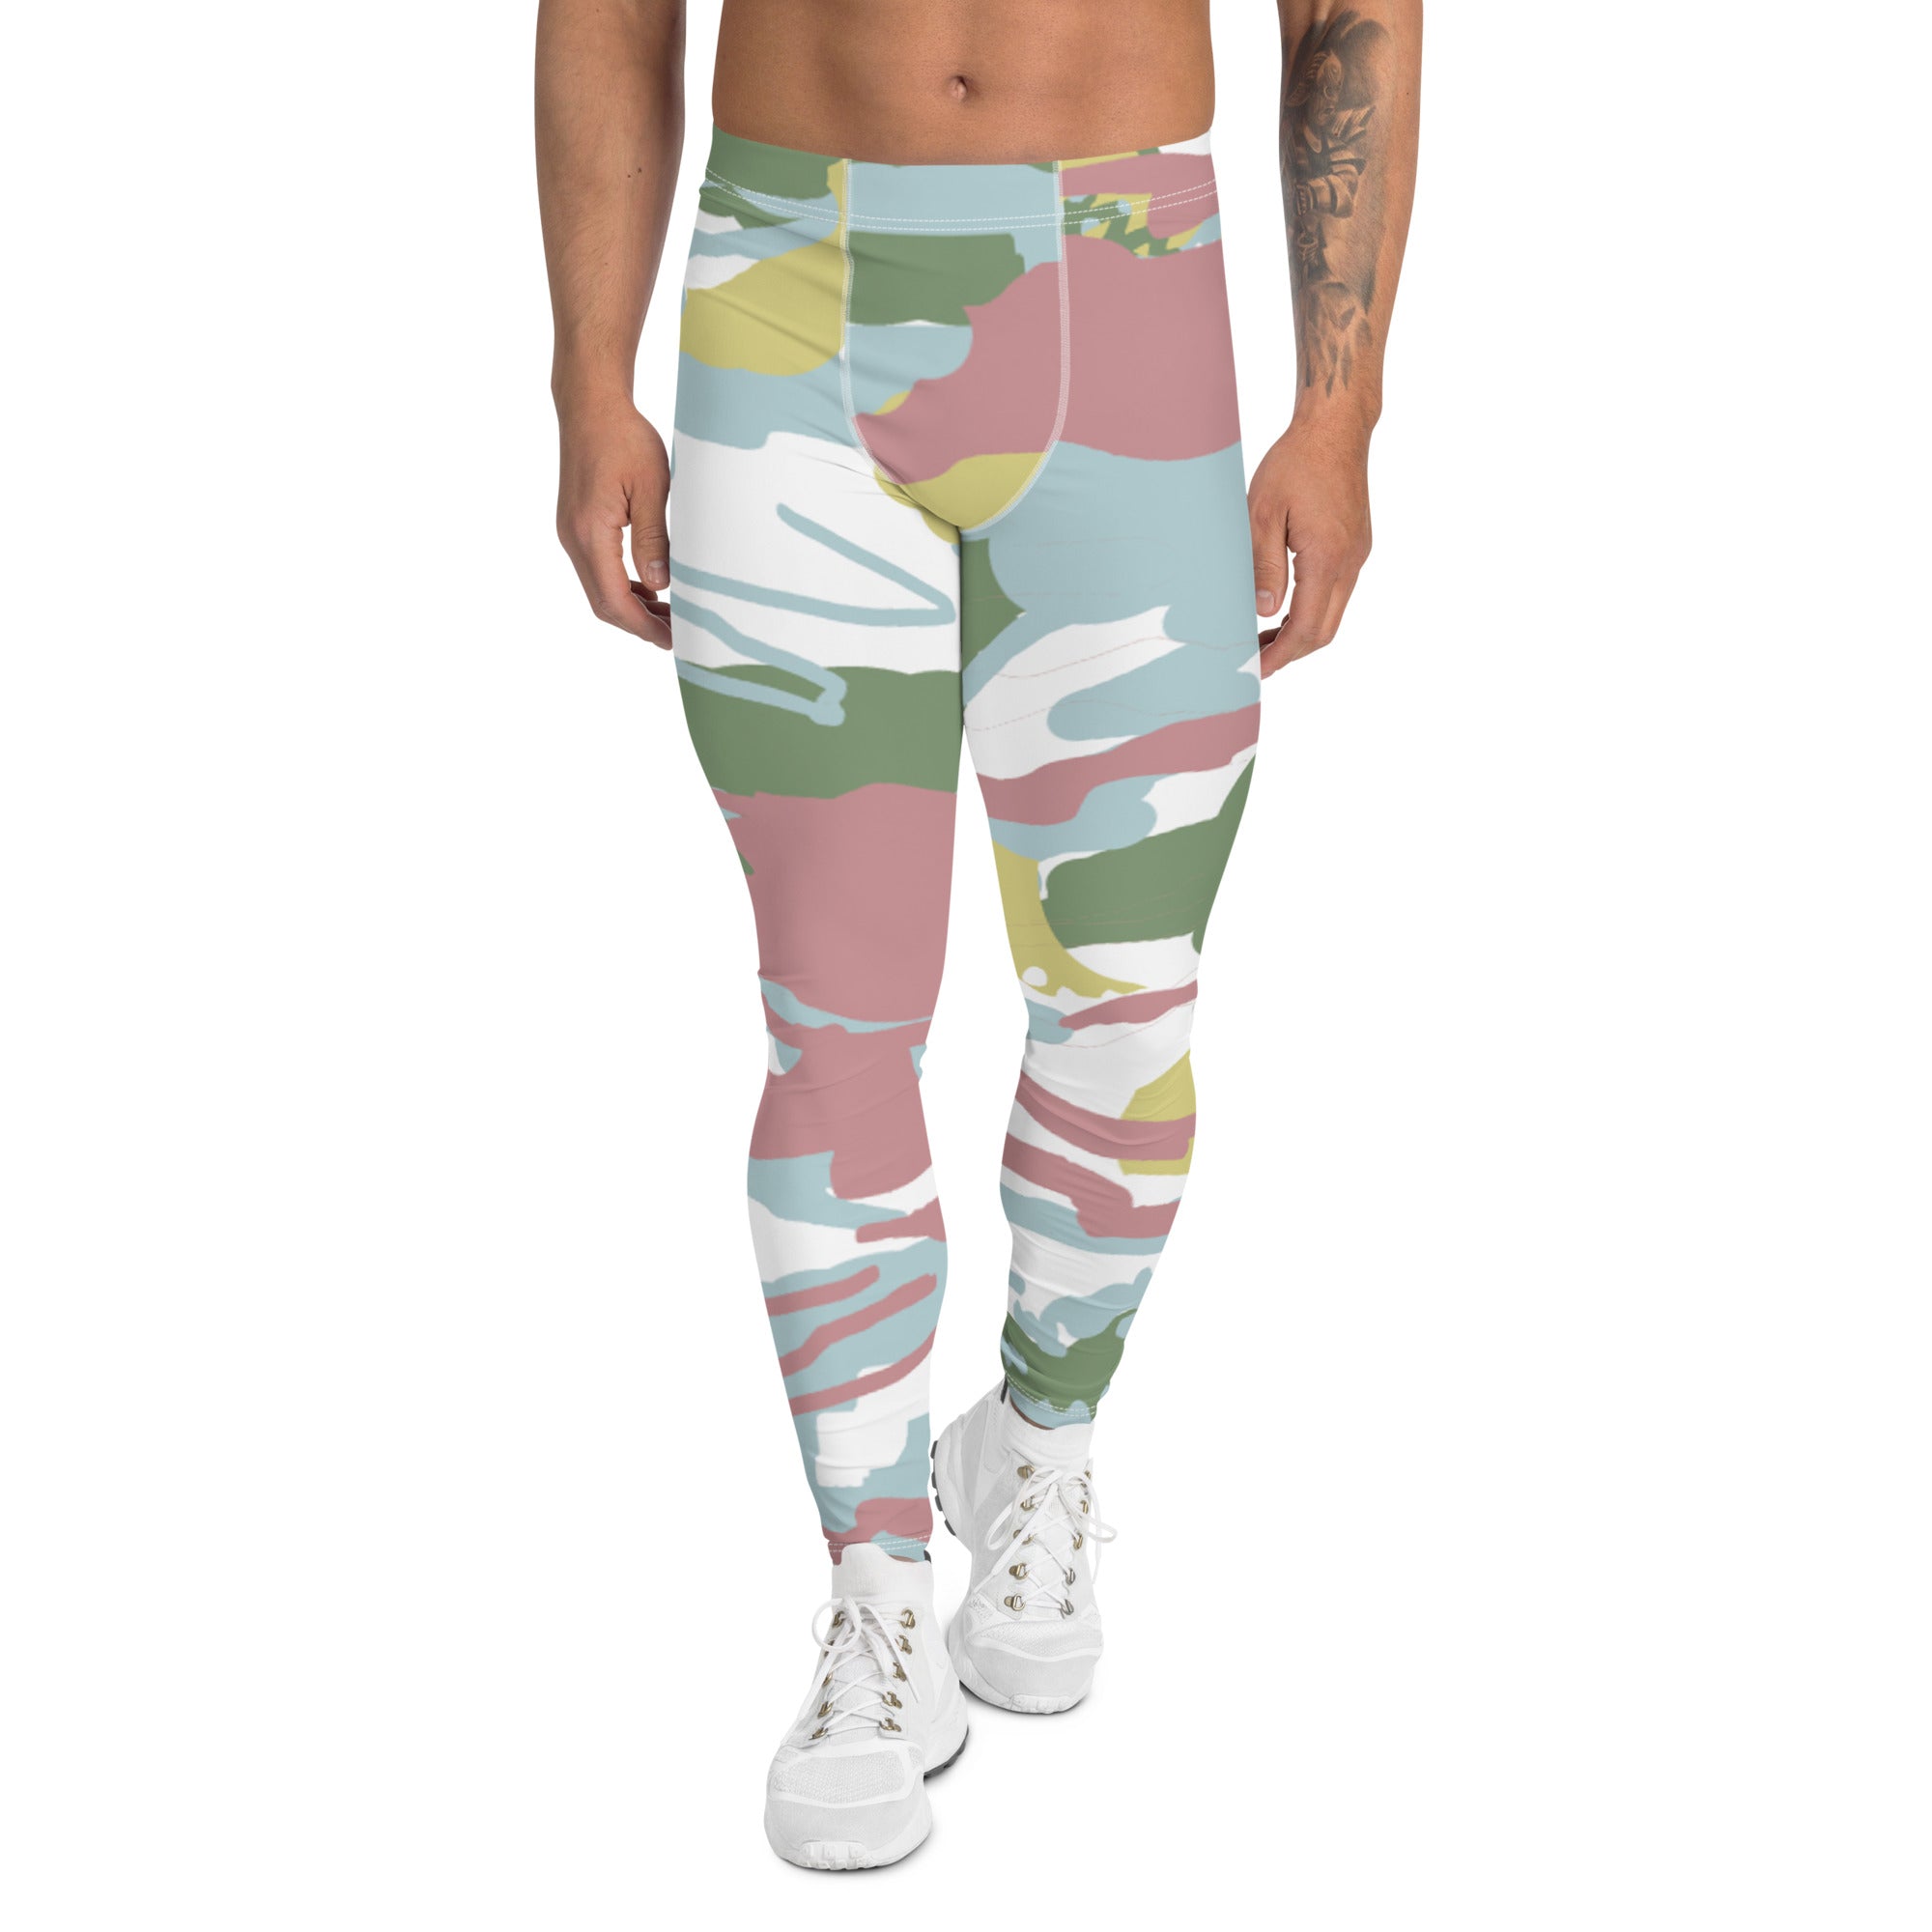 Green Army Camo Leggings for Men Military Camouflage Pattern Print